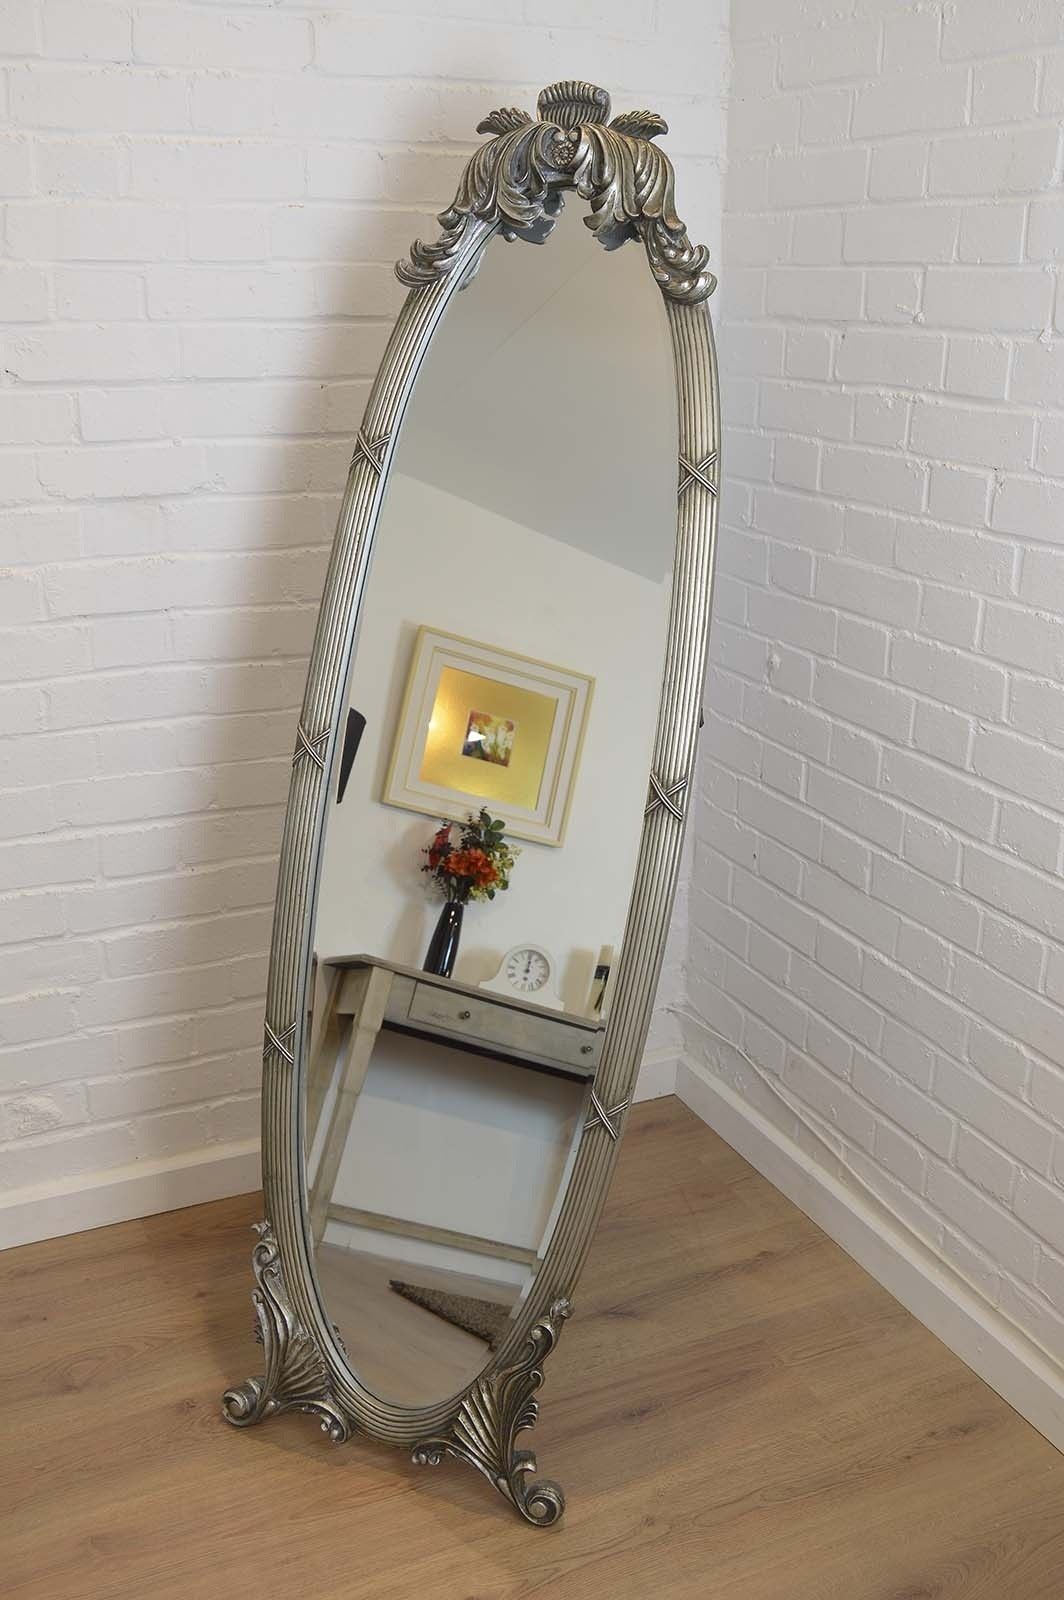 Antique Oval Mirror On Stand Best Antique 2017 Throughout Antique Free Standing Mirror (View 13 of 15)